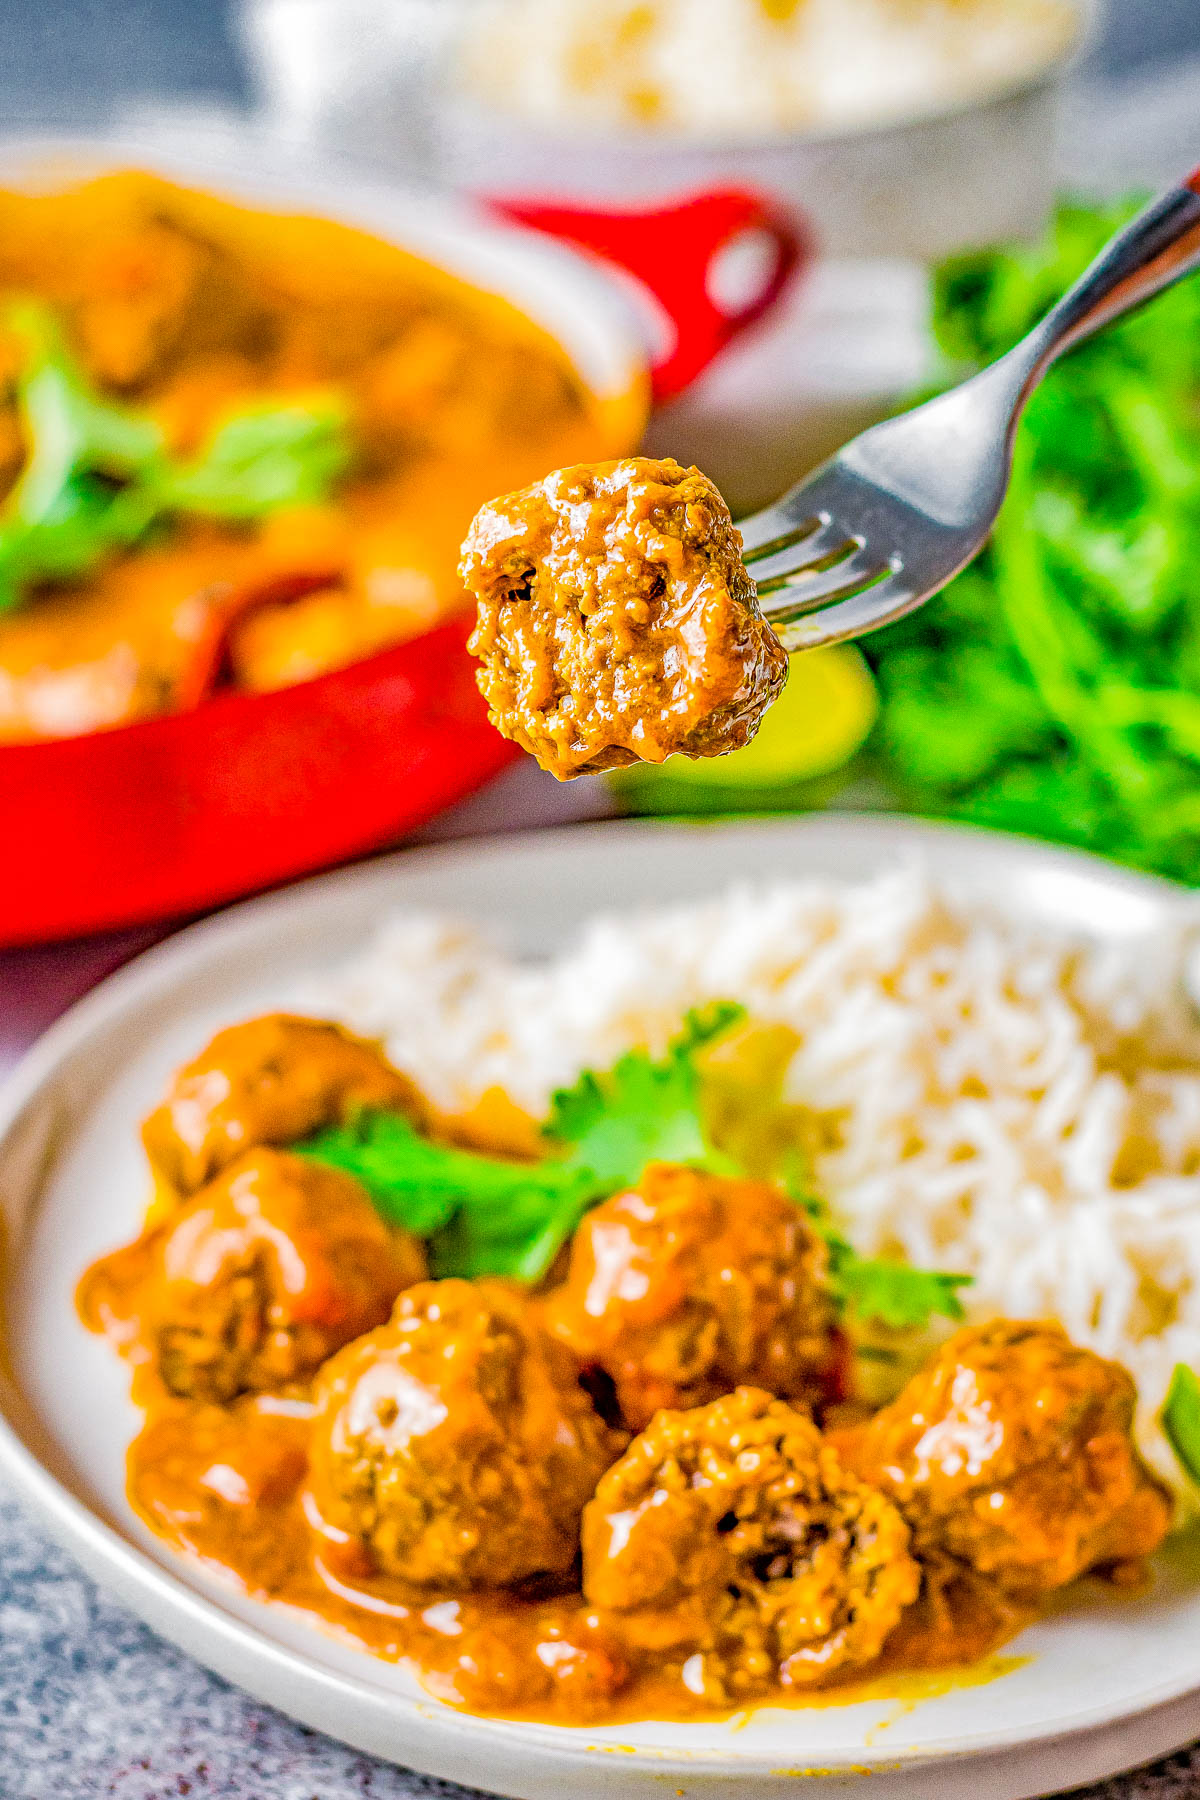 Red Curry Meatballs - Indian-spiced beef meatballs are simmered in a homemade red curry sauce that's perfectly spicy, savory, and so comforting especially when served over a bed of basmati rice! Learn how to recreate this ethnic dish that'll IMPRESS your family and friends and have everyone begging for more!